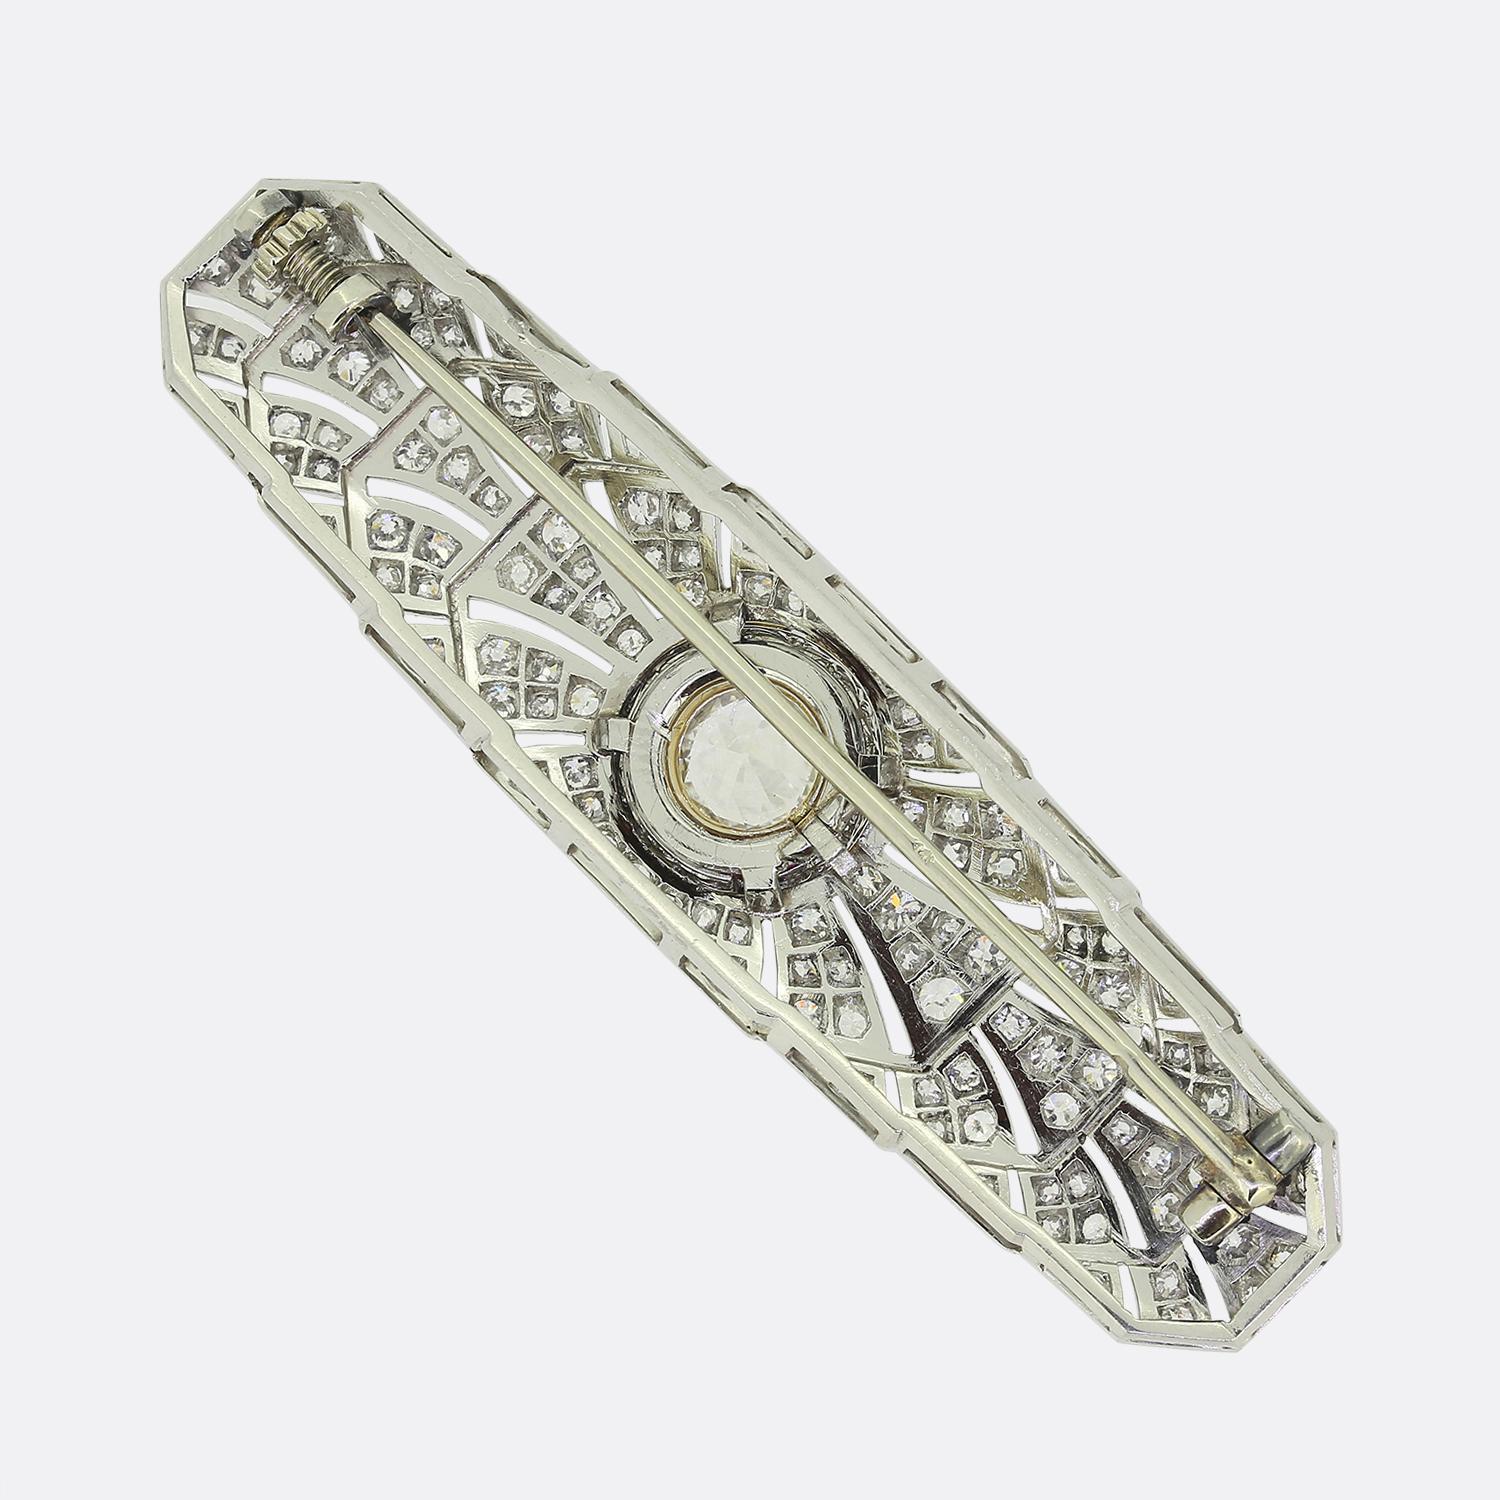 Here we have a gorgeous brooch from Raymond Templier crafted during the height of the Art Deco movement. This 18ct white gold piece has been beautifully decorated with a vast array of round faceted old cut diamonds highlighted by intricate milgrain